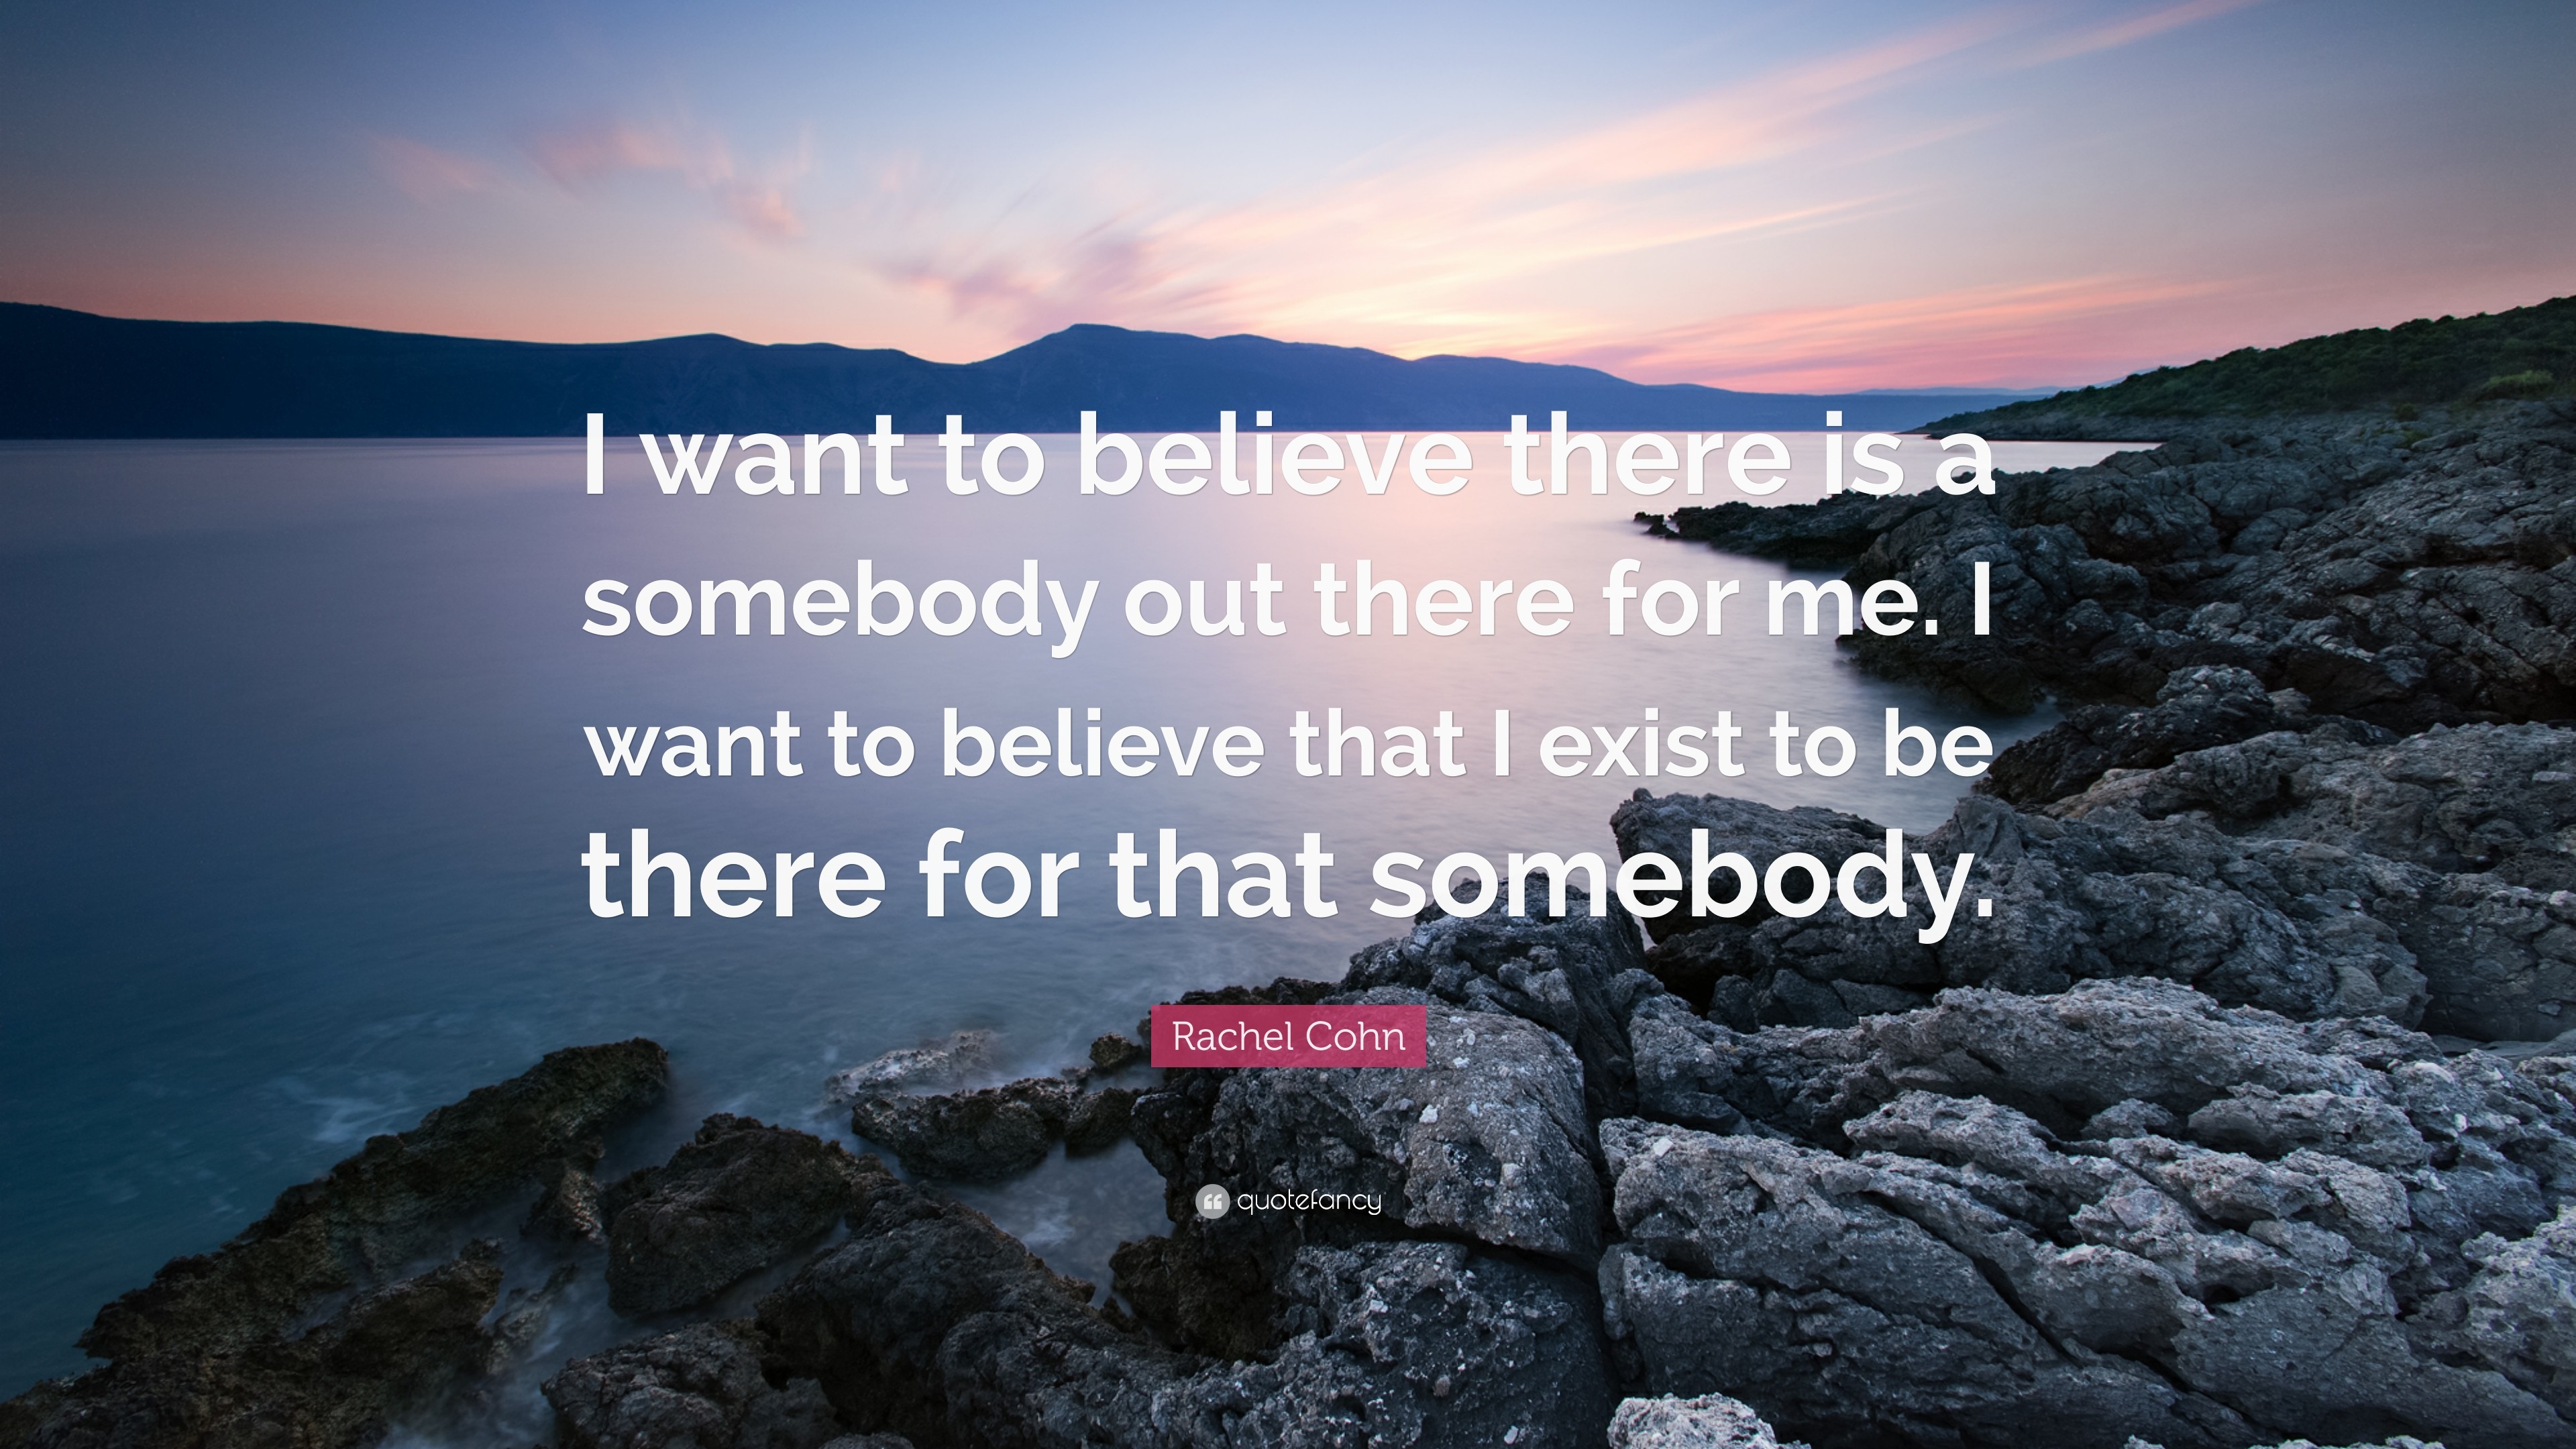 Rachel Cohn Quote I want to believe there is a somebody out there for